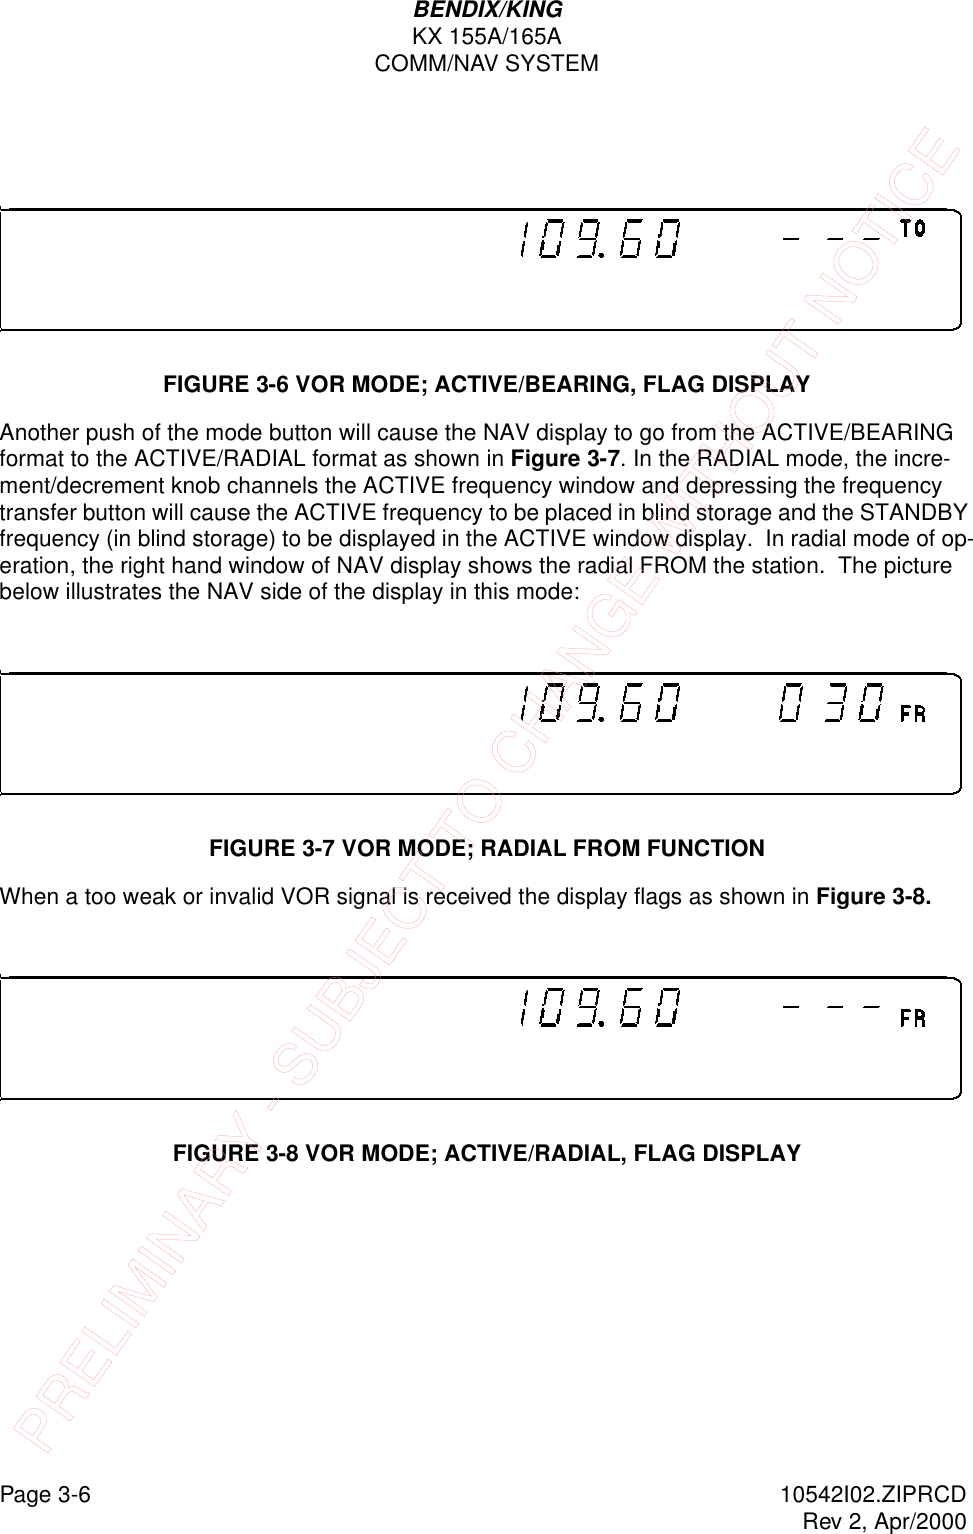 Page 3-6 10542I02.ZIPRCDRev 2, Apr/2000BENDIX/KINGKX 155A/165ACOMM/NAV SYSTEMFIGURE 3-6 VOR MODE; ACTIVE/BEARING, FLAG DISPLAYAnother push of the mode button will cause the NAV display to go from the ACTIVE/BEARING format to the ACTIVE/RADIAL format as shown in Figure 3-7. In the RADIAL mode, the incre-ment/decrement knob channels the ACTIVE frequency window and depressing the frequency transfer button will cause the ACTIVE frequency to be placed in blind storage and the STANDBY frequency (in blind storage) to be displayed in the ACTIVE window display.  In radial mode of op-eration, the right hand window of NAV display shows the radial FROM the station.  The picture below illustrates the NAV side of the display in this mode:FIGURE 3-7 VOR MODE; RADIAL FROM FUNCTIONWhen a too weak or invalid VOR signal is received the display flags as shown in Figure 3-8.FIGURE 3-8 VOR MODE; ACTIVE/RADIAL, FLAG DISPLAYPRELIMINARY - SUBJECT TO CHANGE WITHOUT NOTICE